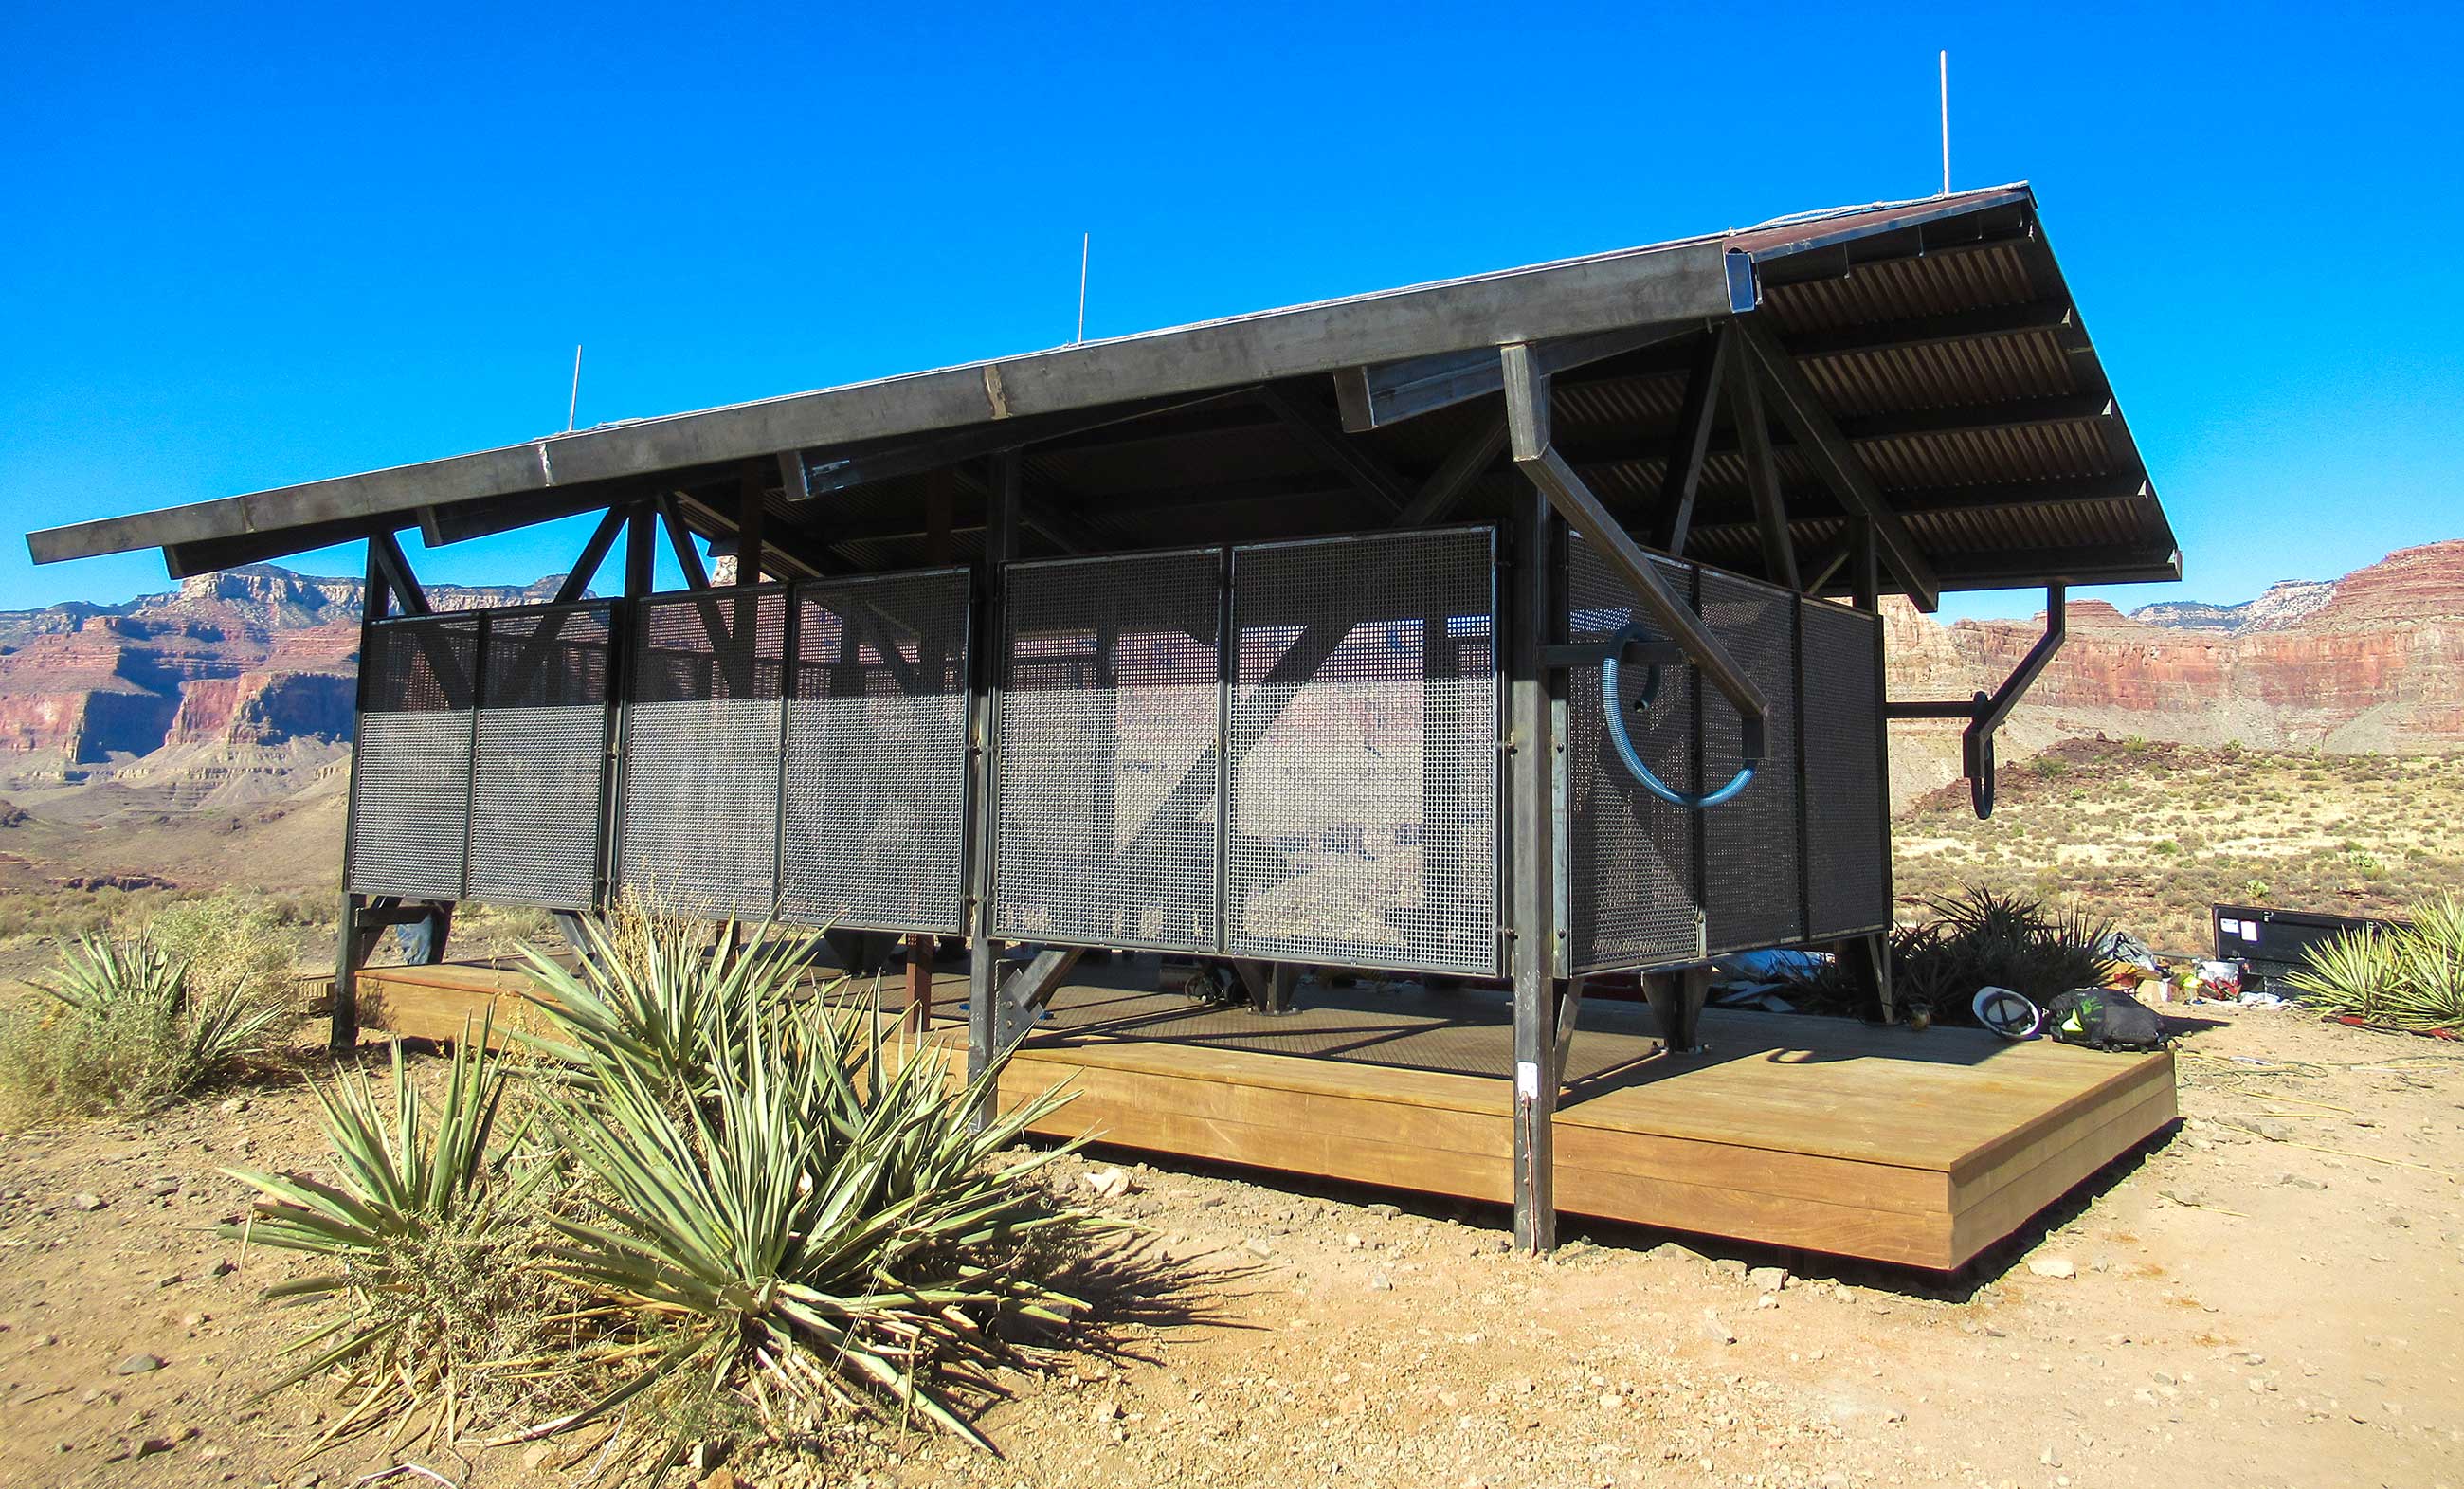 a 12 x 24 foot open-sided shade structure, with canyon walls in the distance.